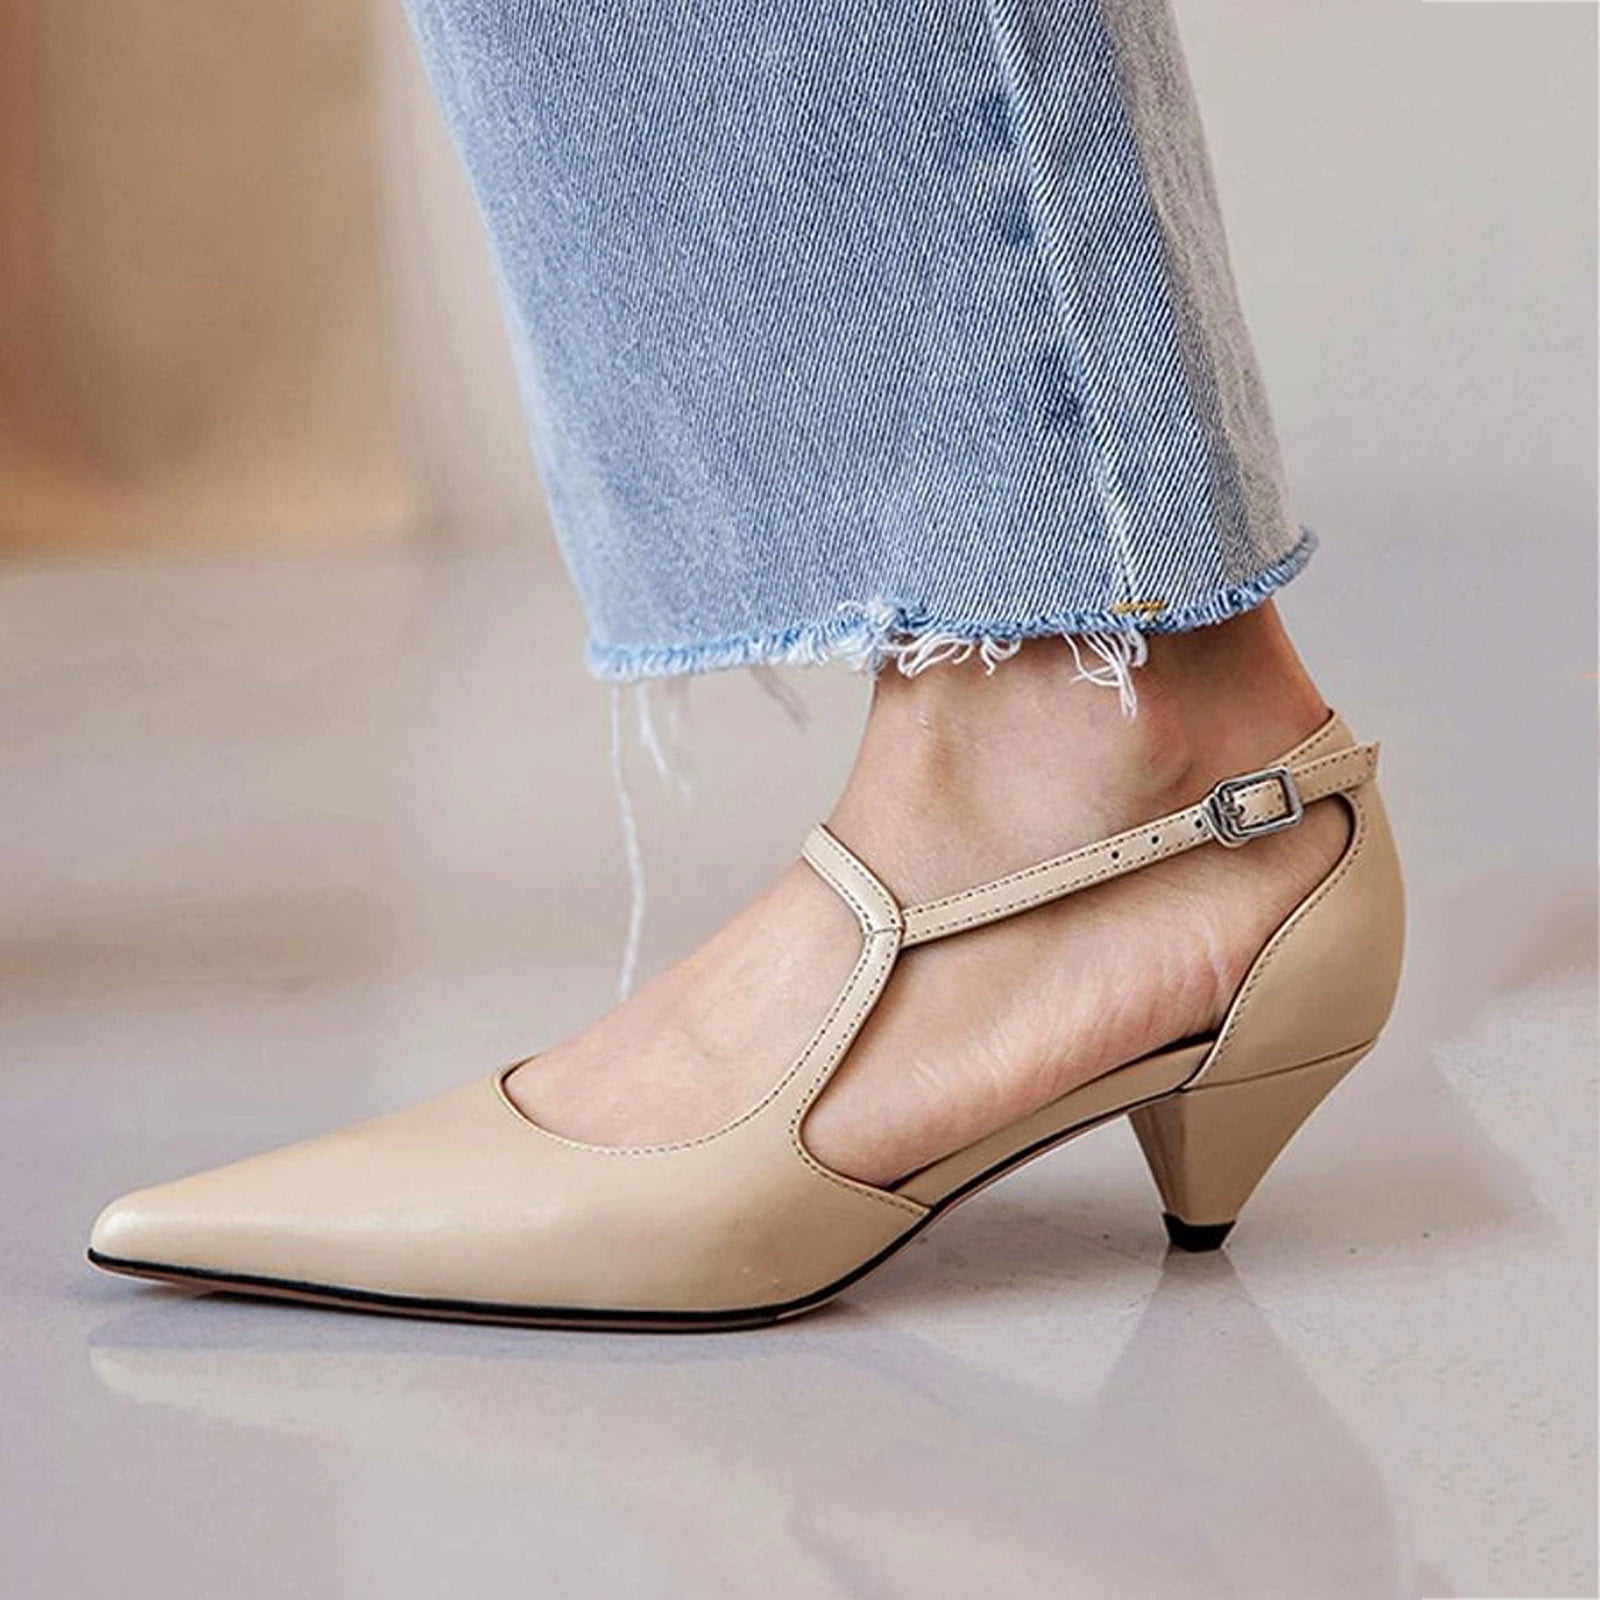 Summer High Heels Leather Shoes Women Professional Soft Pointed Mid Low  Heel Work Stilettos Heels Bright Matte Black White | Shopee Malaysia